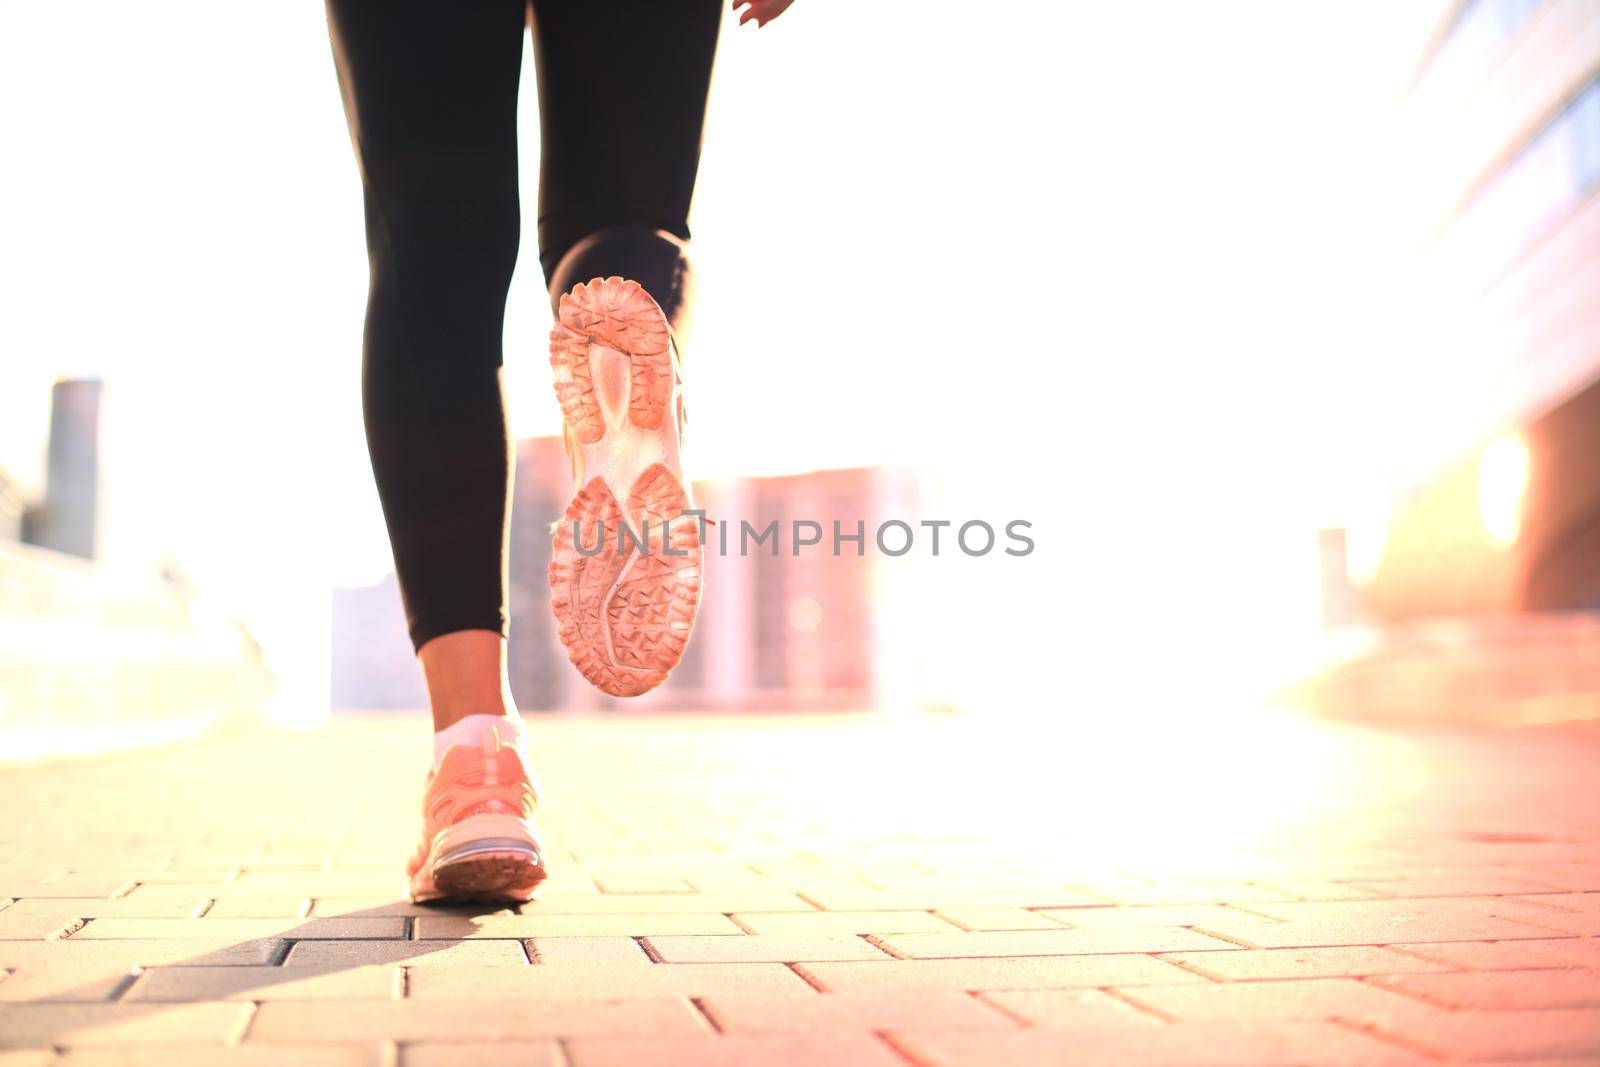 Runner feet running on road closeup on shoe, outdoor at sunset or sunrise in city